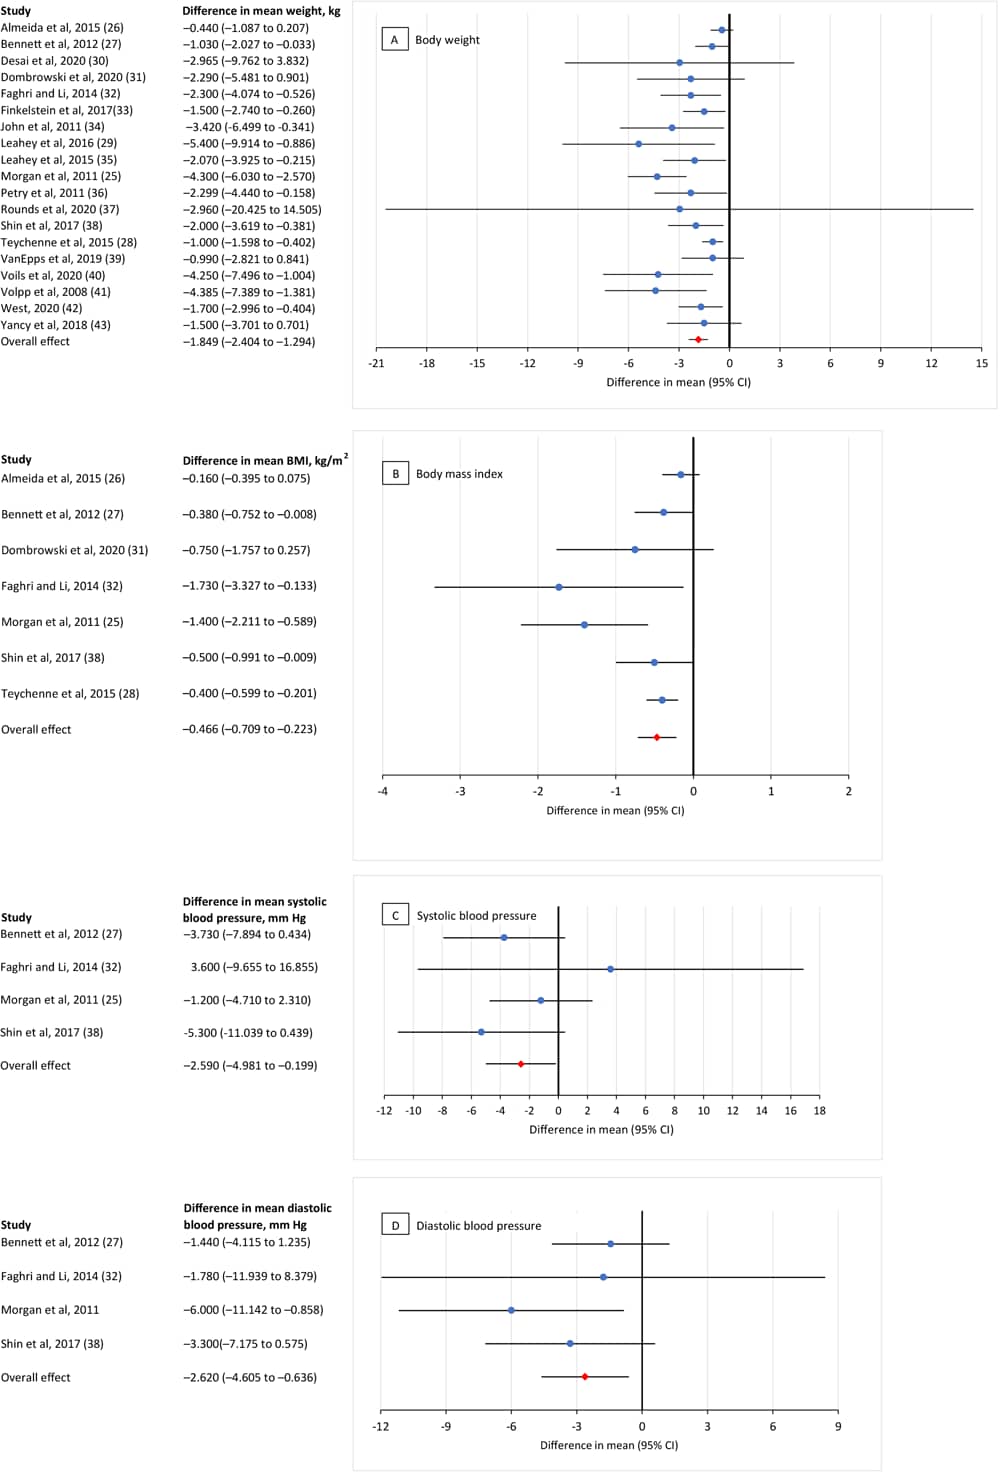 Meta-analysis of the effects of incentives (ie, cash or nonfinancial incentives) on improving diabetes-related health indicators in chronic disease lifestyle modification programs. A, the effect of incentives on body weight (kg); calculations were based on 23 comparisons reported in 19 studies (25–43). B, the effect of incentives on body mass index (kg/m2); calculations were based on 7 comparisons reported in 7 studies (25–28,31,32,38). C, the effect of incentives on systolic blood pressure (mm Hg); calculations were based on 4 comparisons reported in 4 studies (25,27,32,38). D, the effect of incentives on diastolic blood pressure (mm Hg); calculations were based on 4 comparisons reported in 4 studies (25,27,32,38). Values 0 indicate no incentive effect.